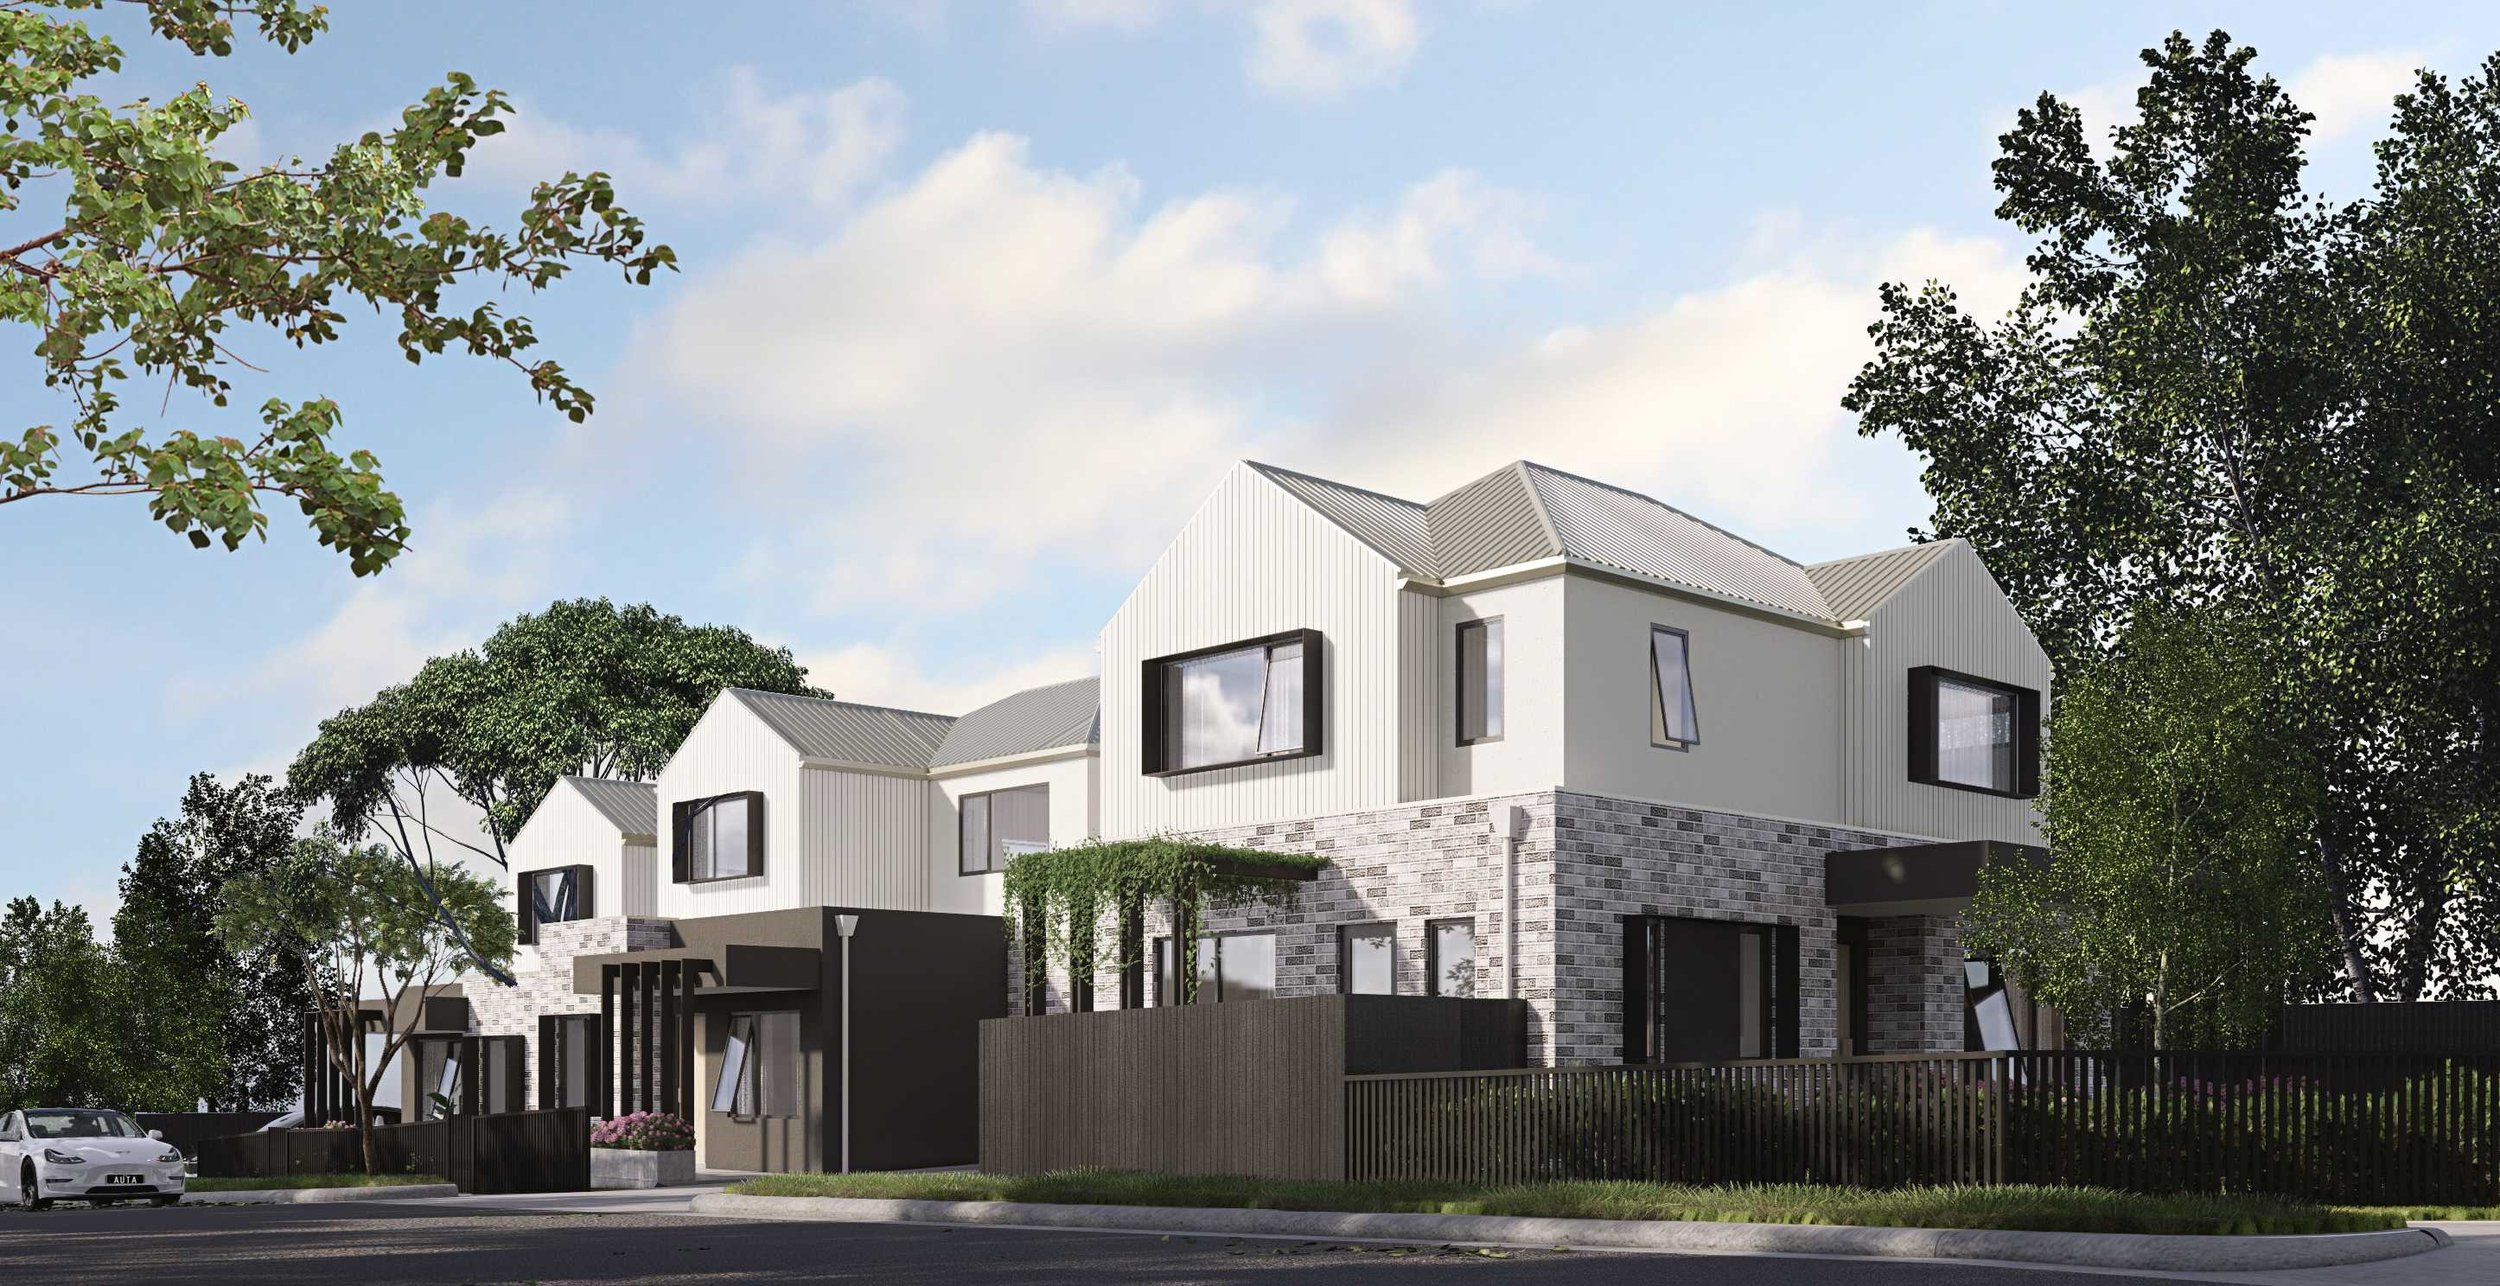 Bentleigh East - 295 East Boundary Road, Bentleigh East, VIC 3165 - Townly - 4.jpg